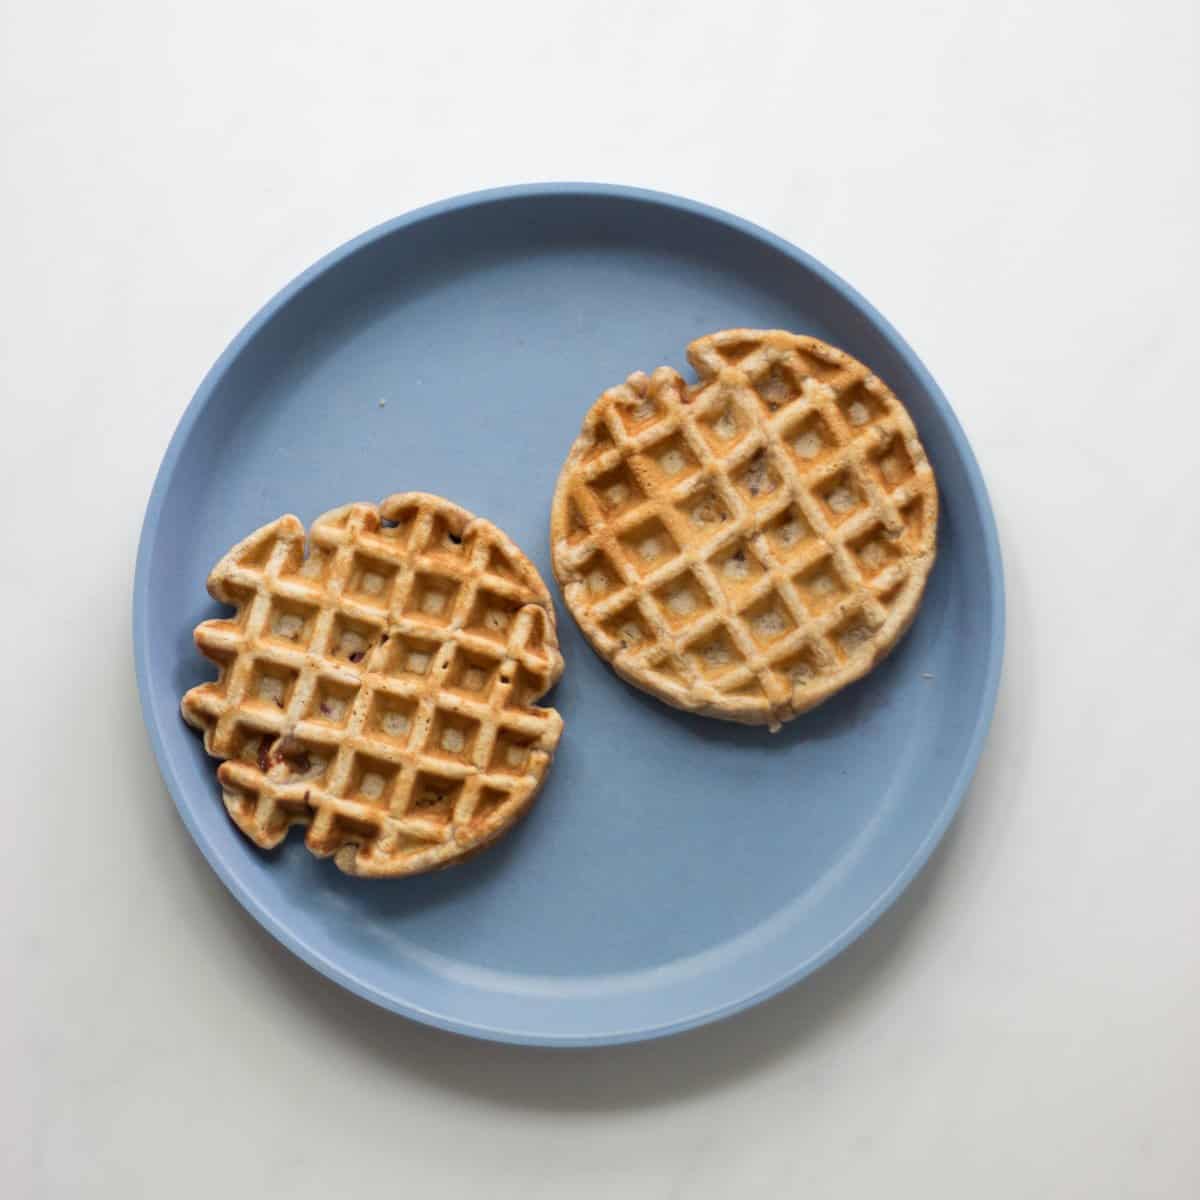 Two mini waffles on a blue plate.